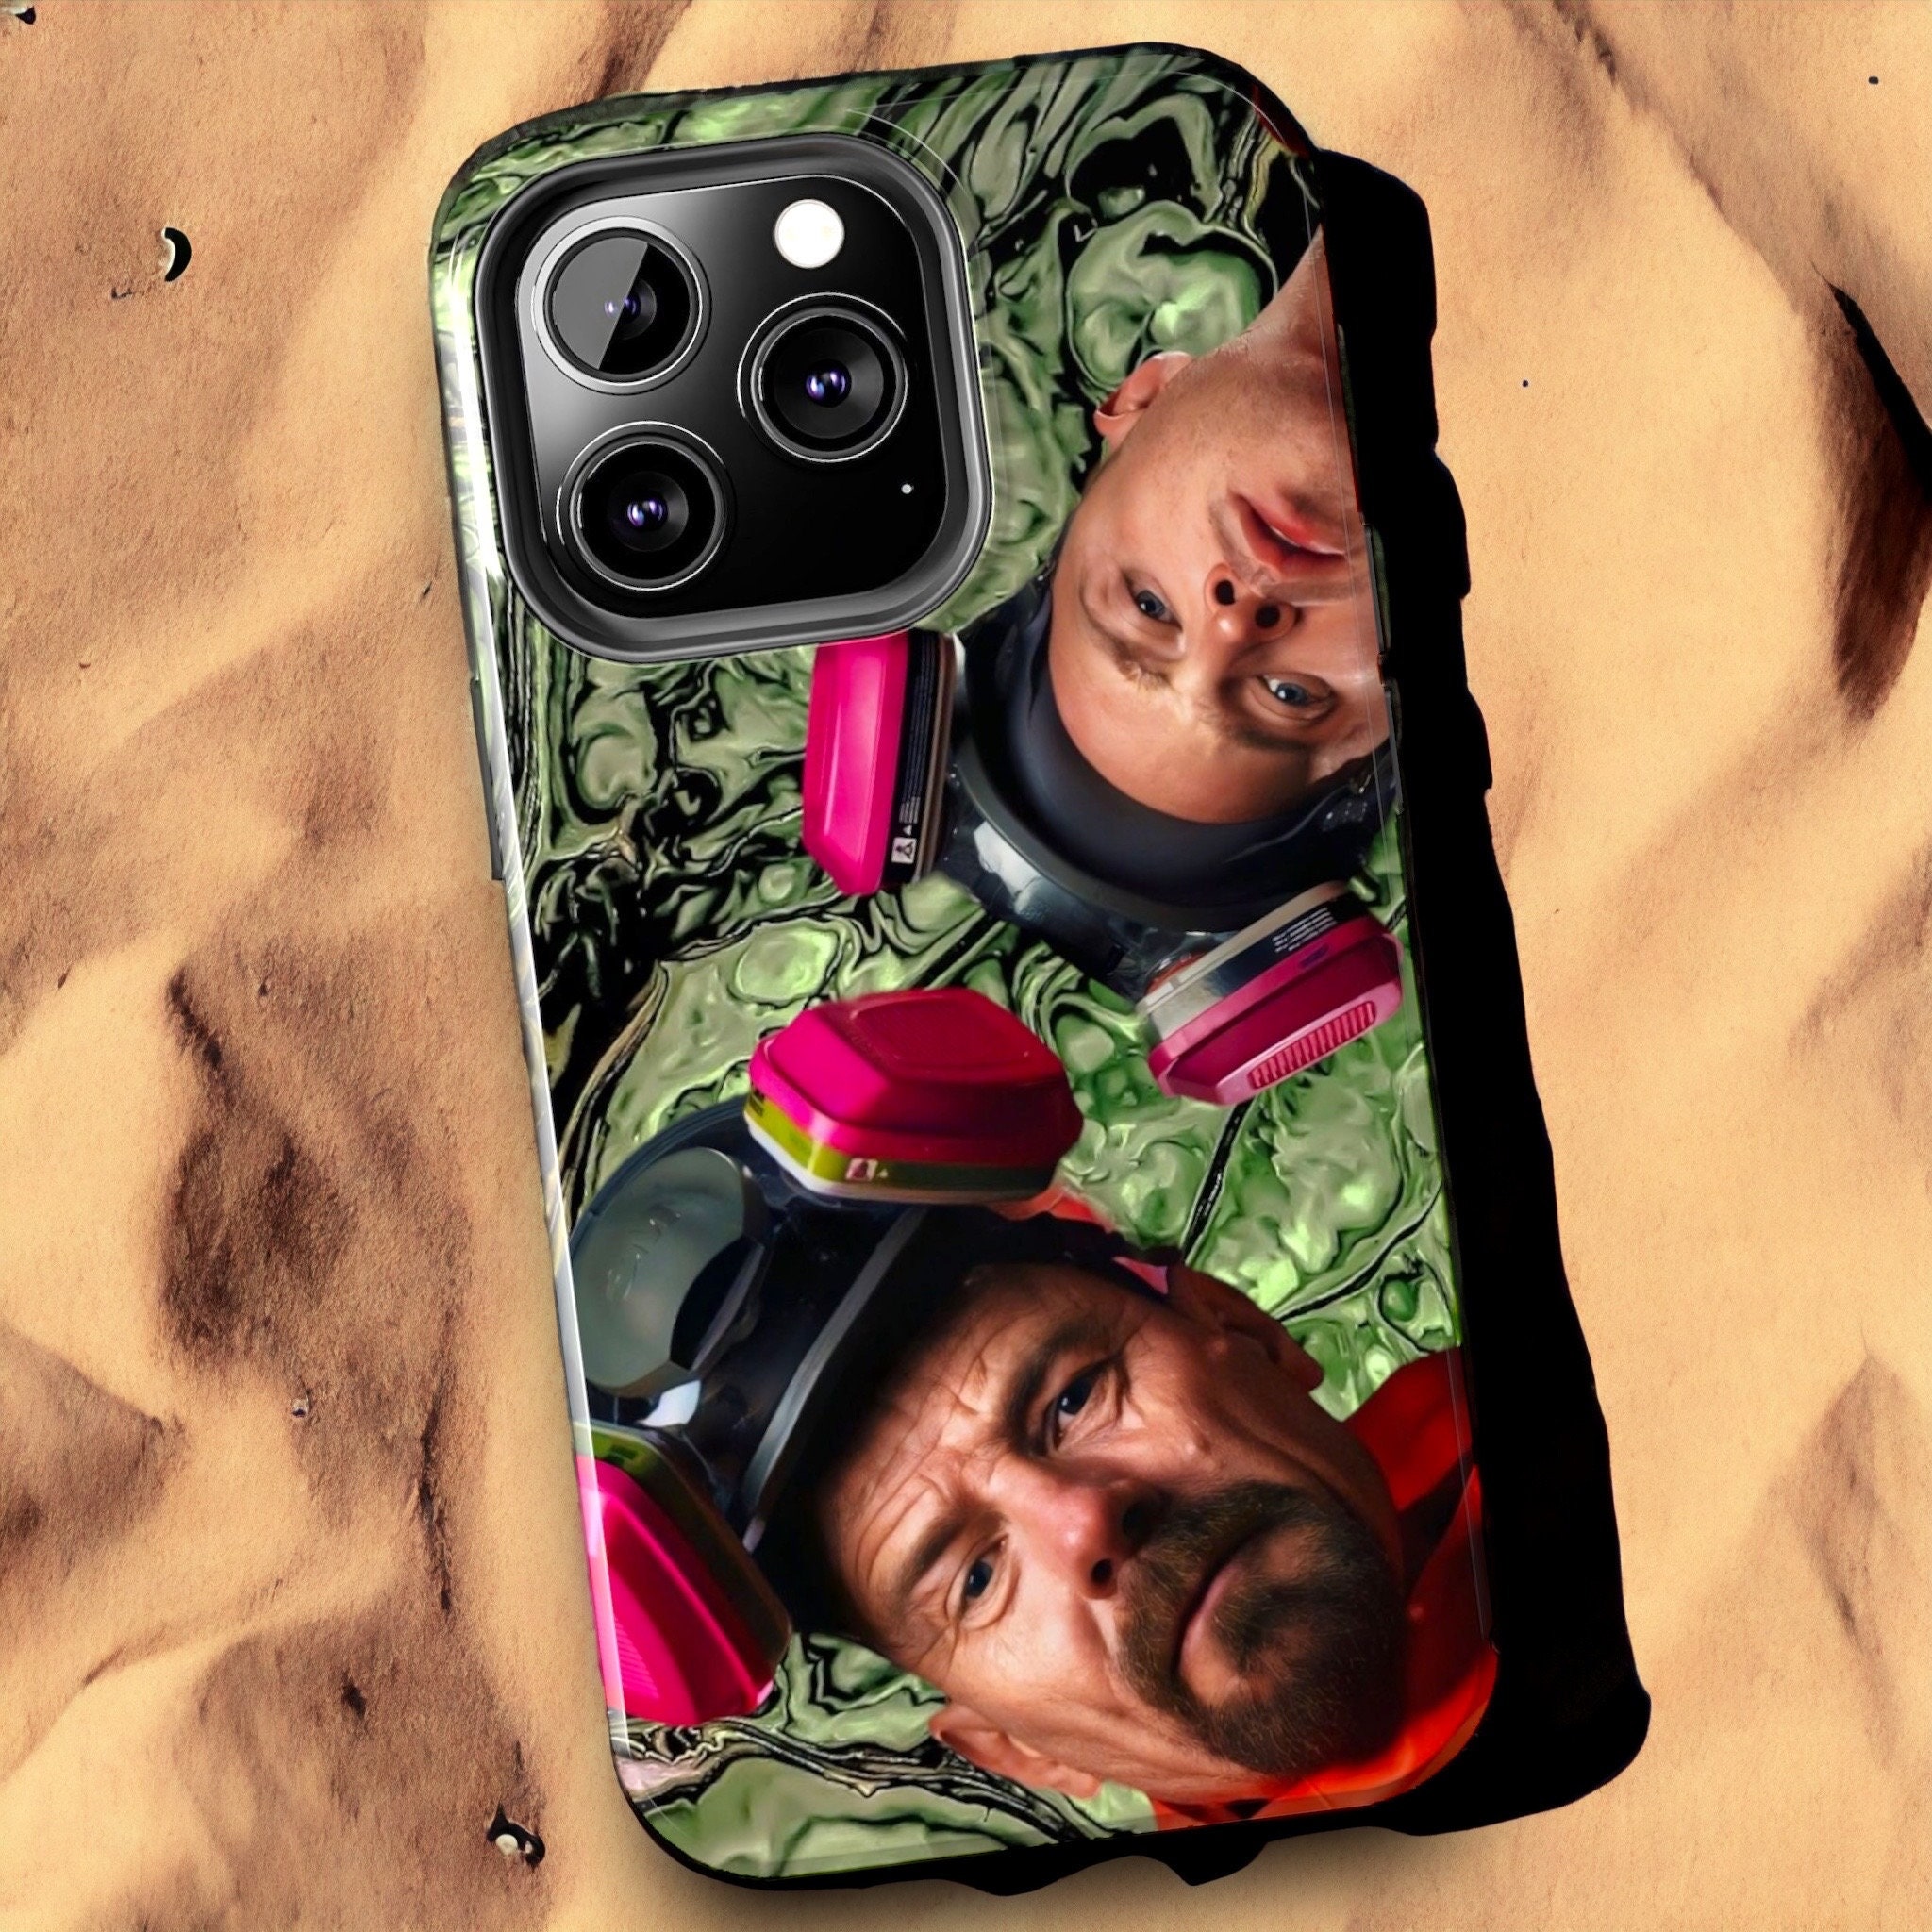 Breaking Bad iPhone Case - Cold Ones